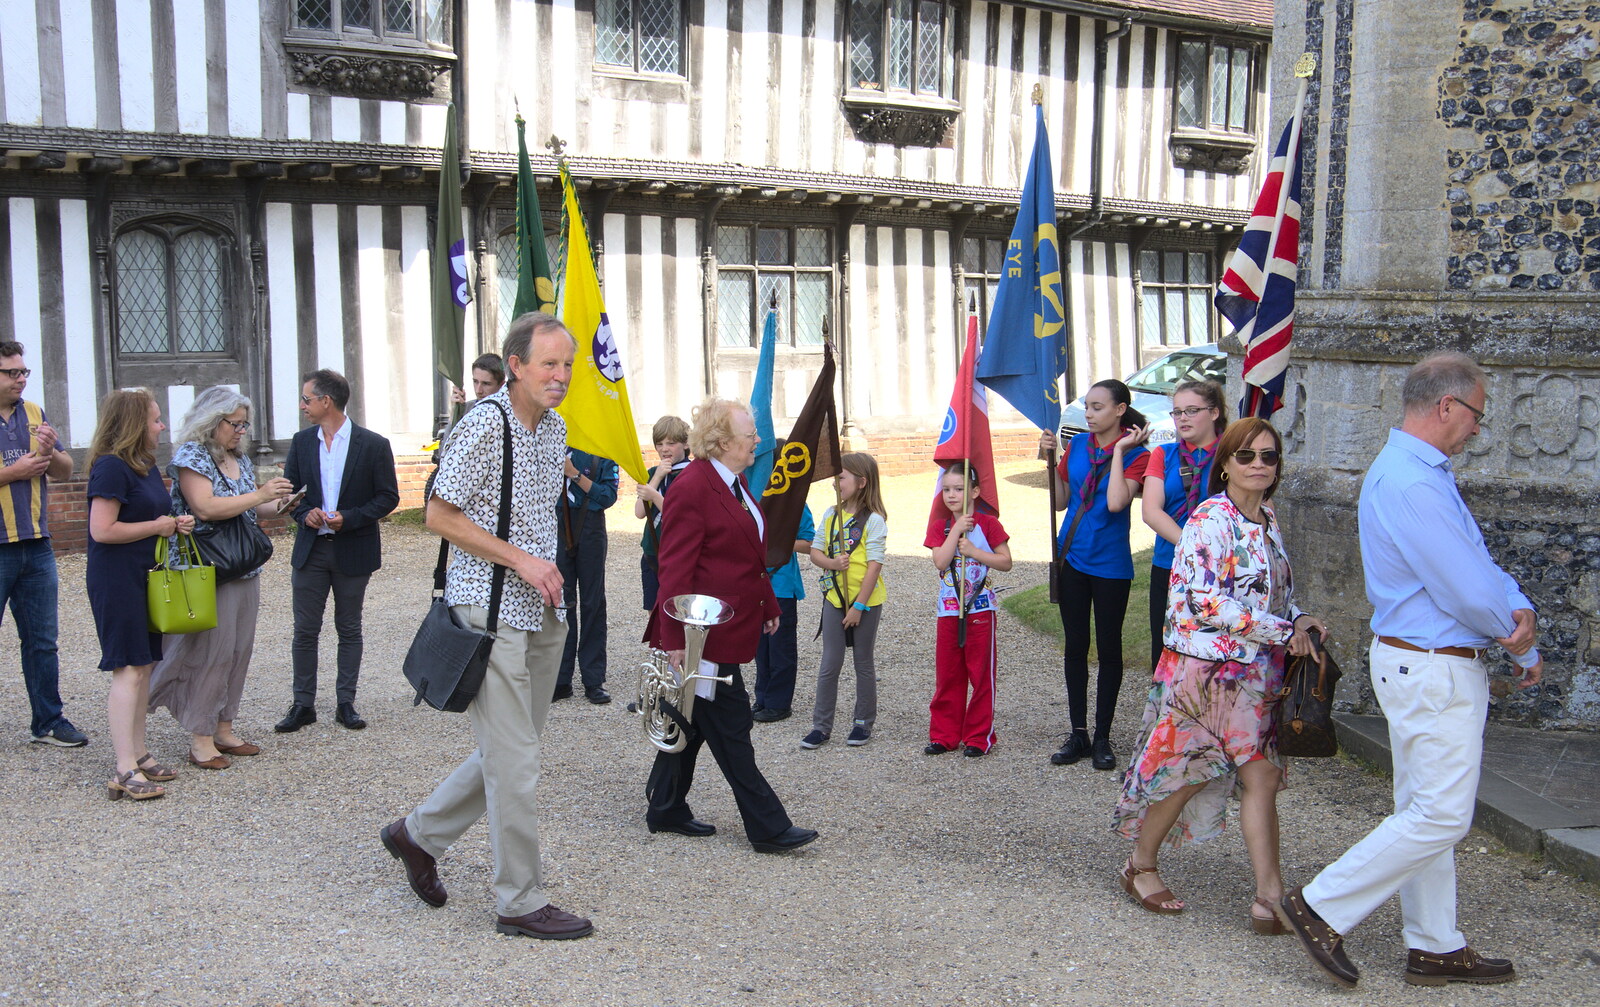 Merlin, a former mayor of Eye, strides past from The Mayor Making Parade, Eye, Suffolk - 24th June 2018